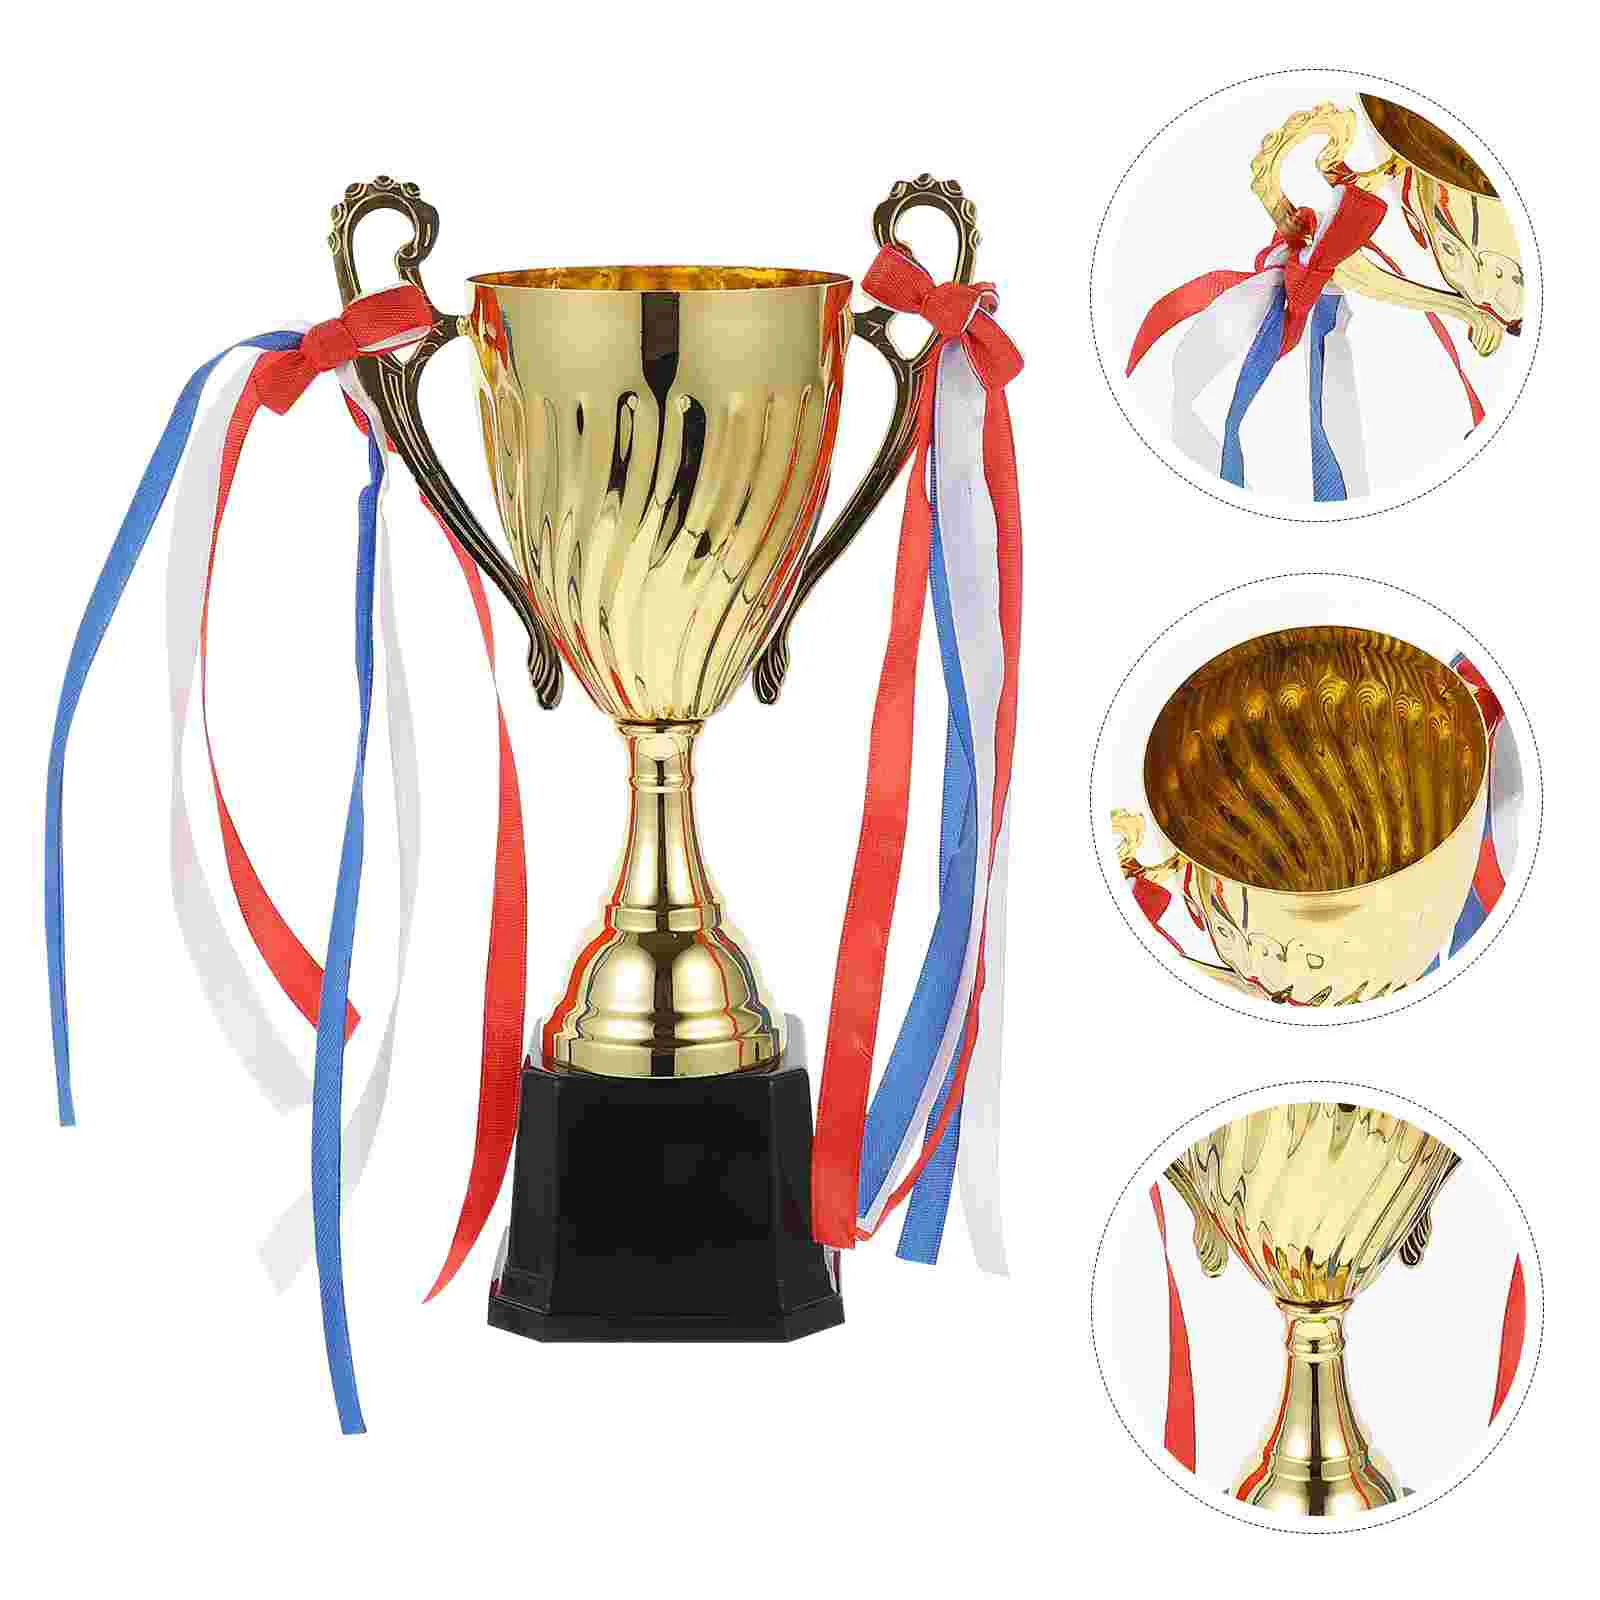 

Trophy Cup,.65 Inch Large Trophy Cup for Trophy Keepsake, Award for Sports, Tournaments, Competitions